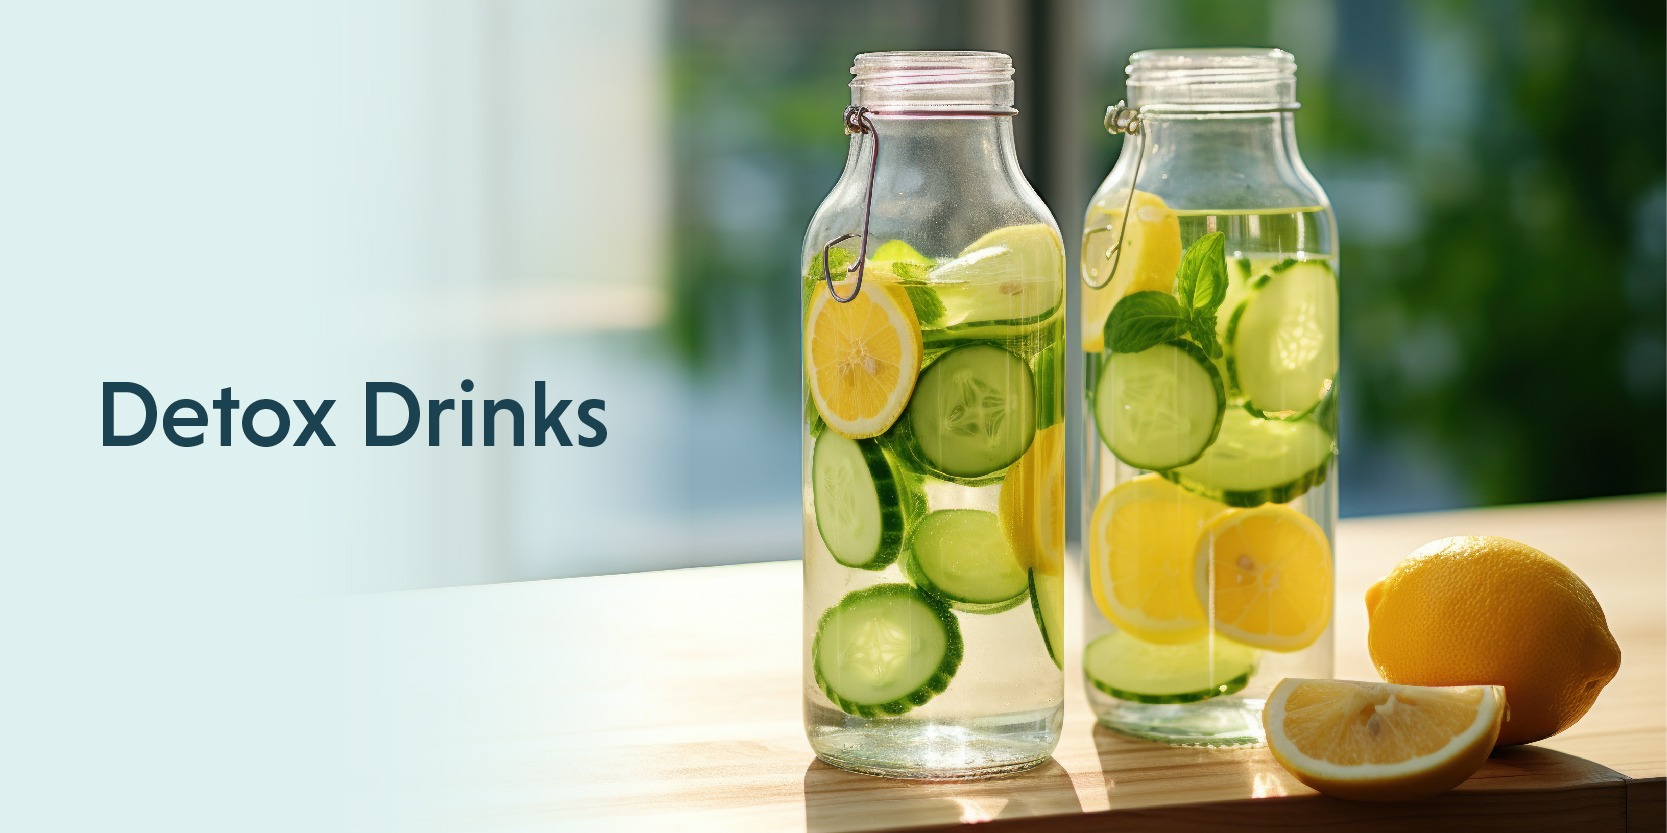 Detox Drinks Introduction